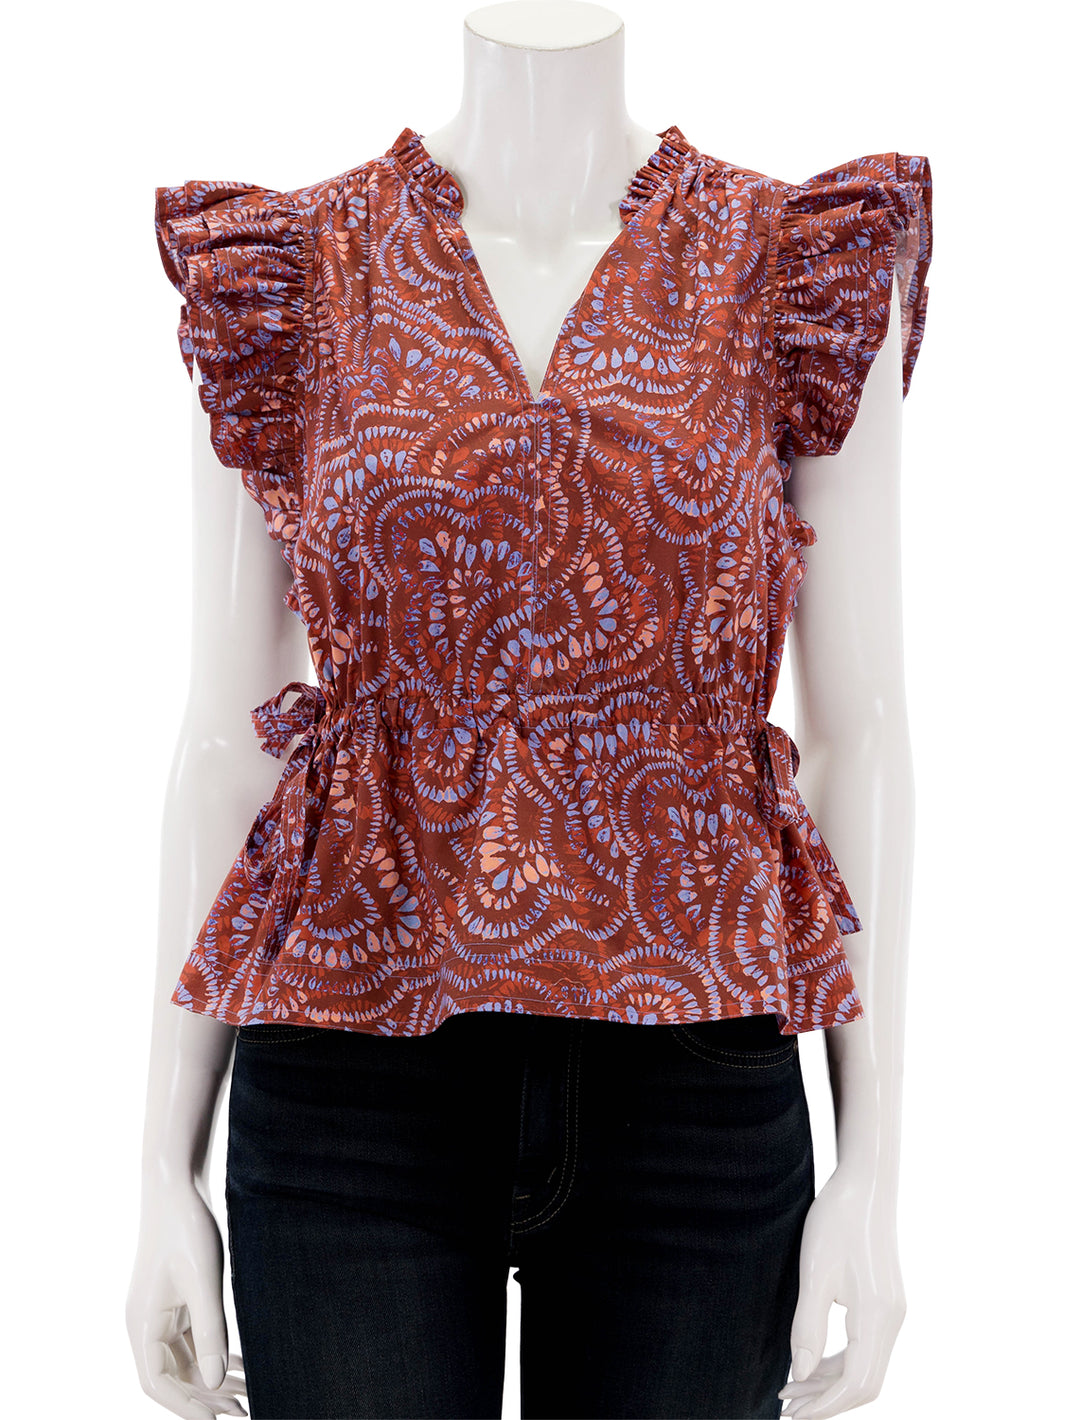 Front view of Marie Oliver's olive top in cranberry burst.